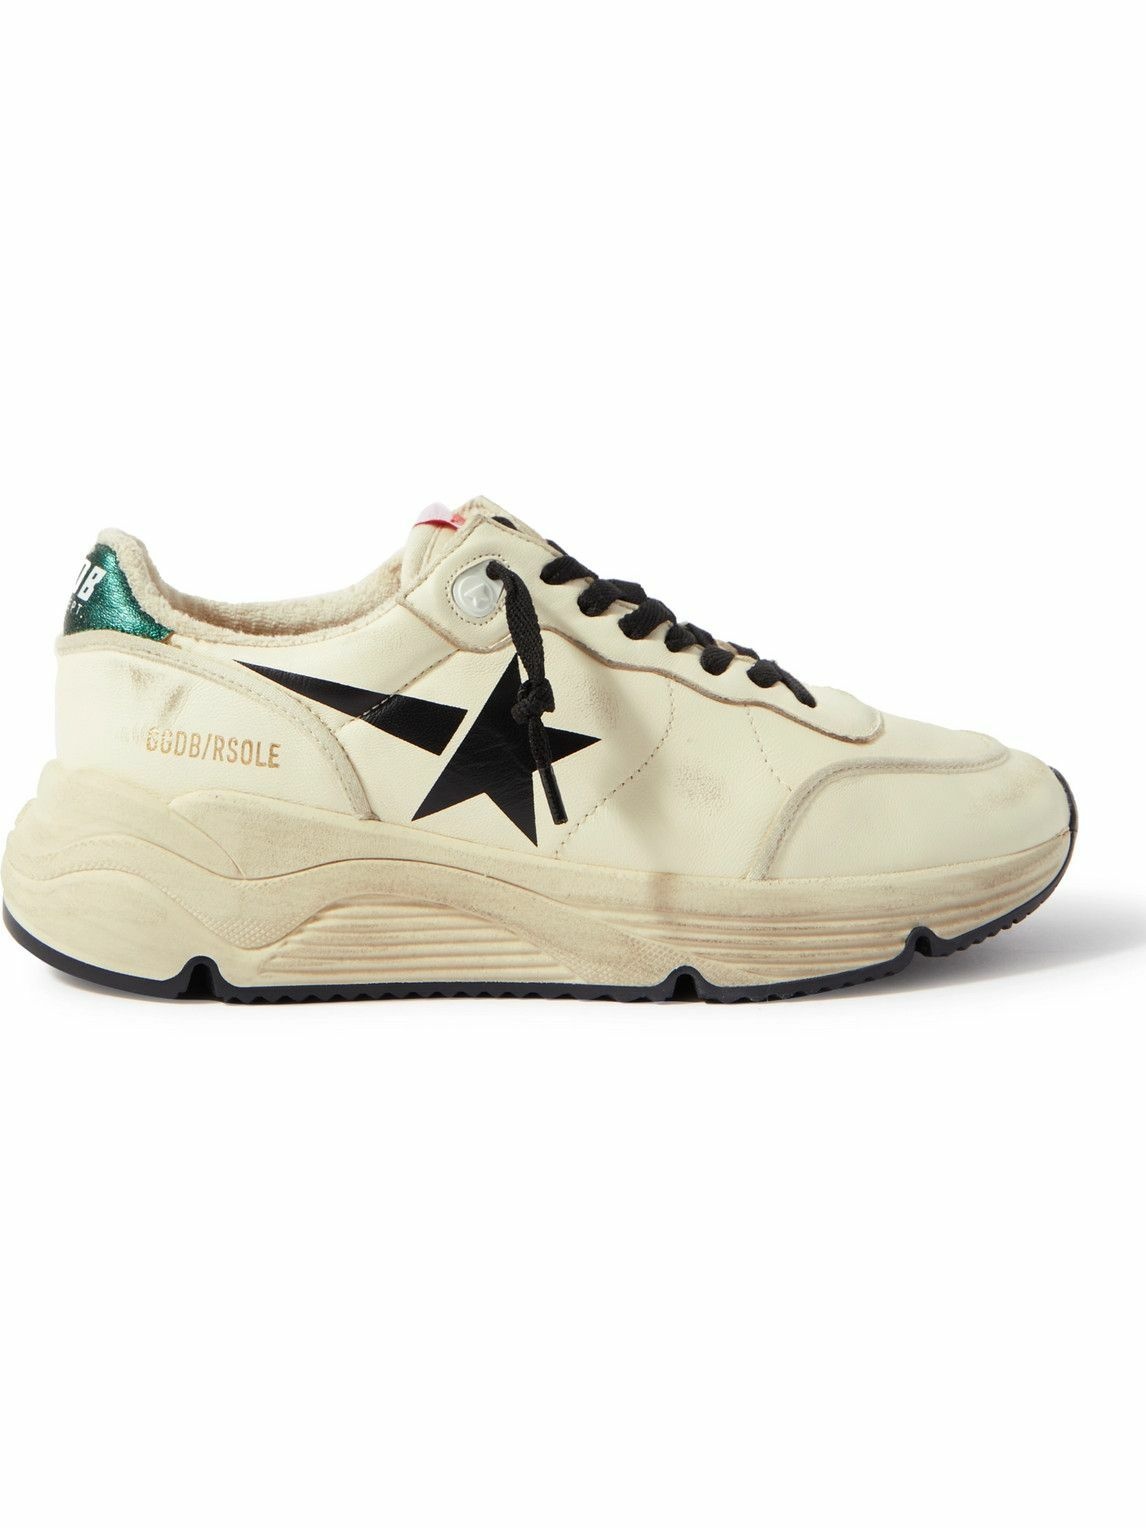 Golden Goose - Running Sole Distressed Leather Sneakers - White Golden ...